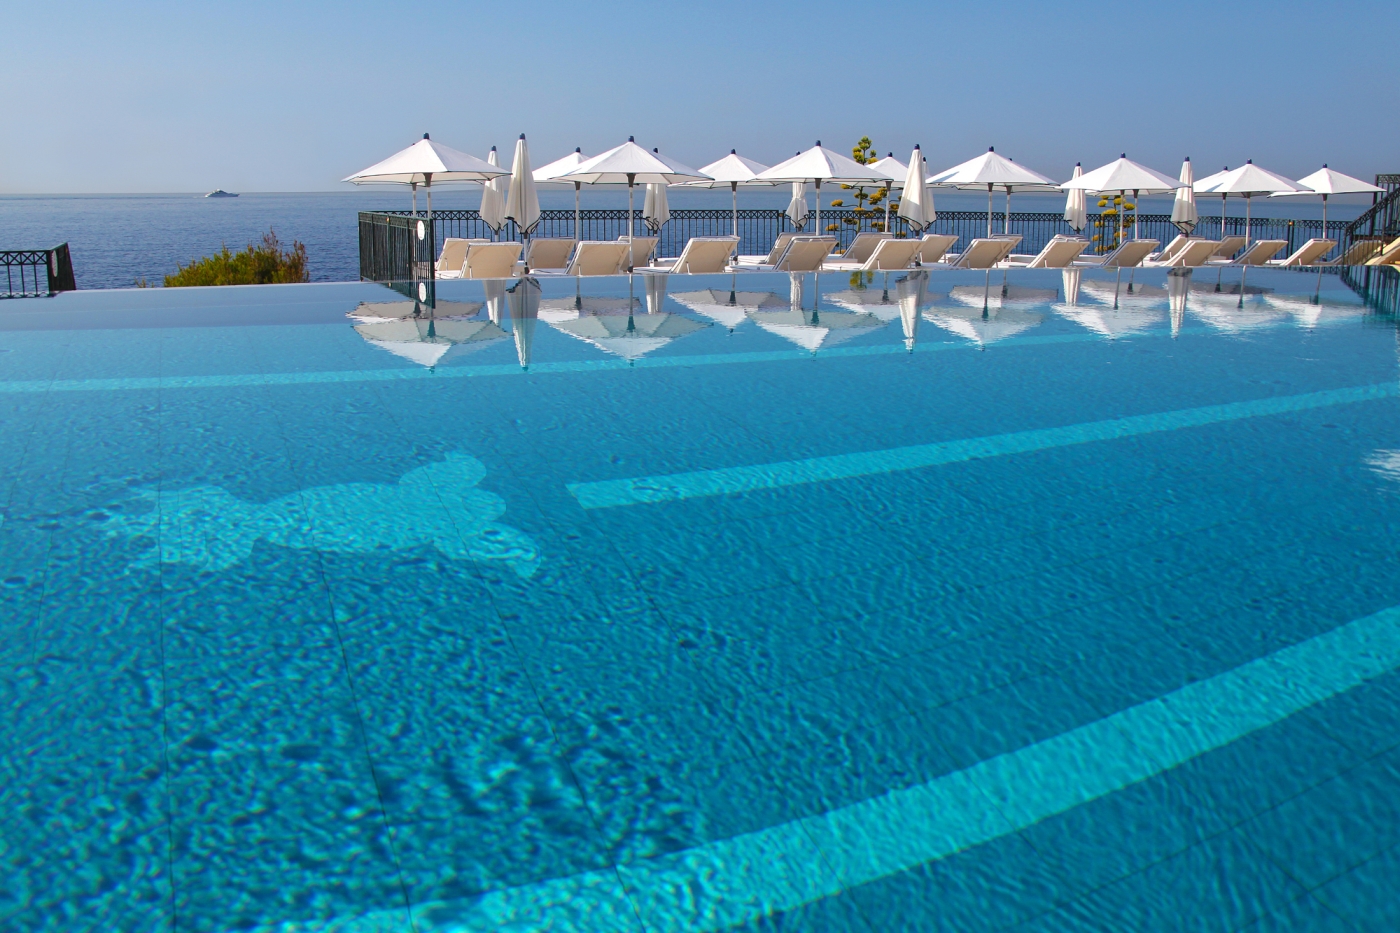 Pool with sea view at Grand-Hotel du Cap-Ferrat in France